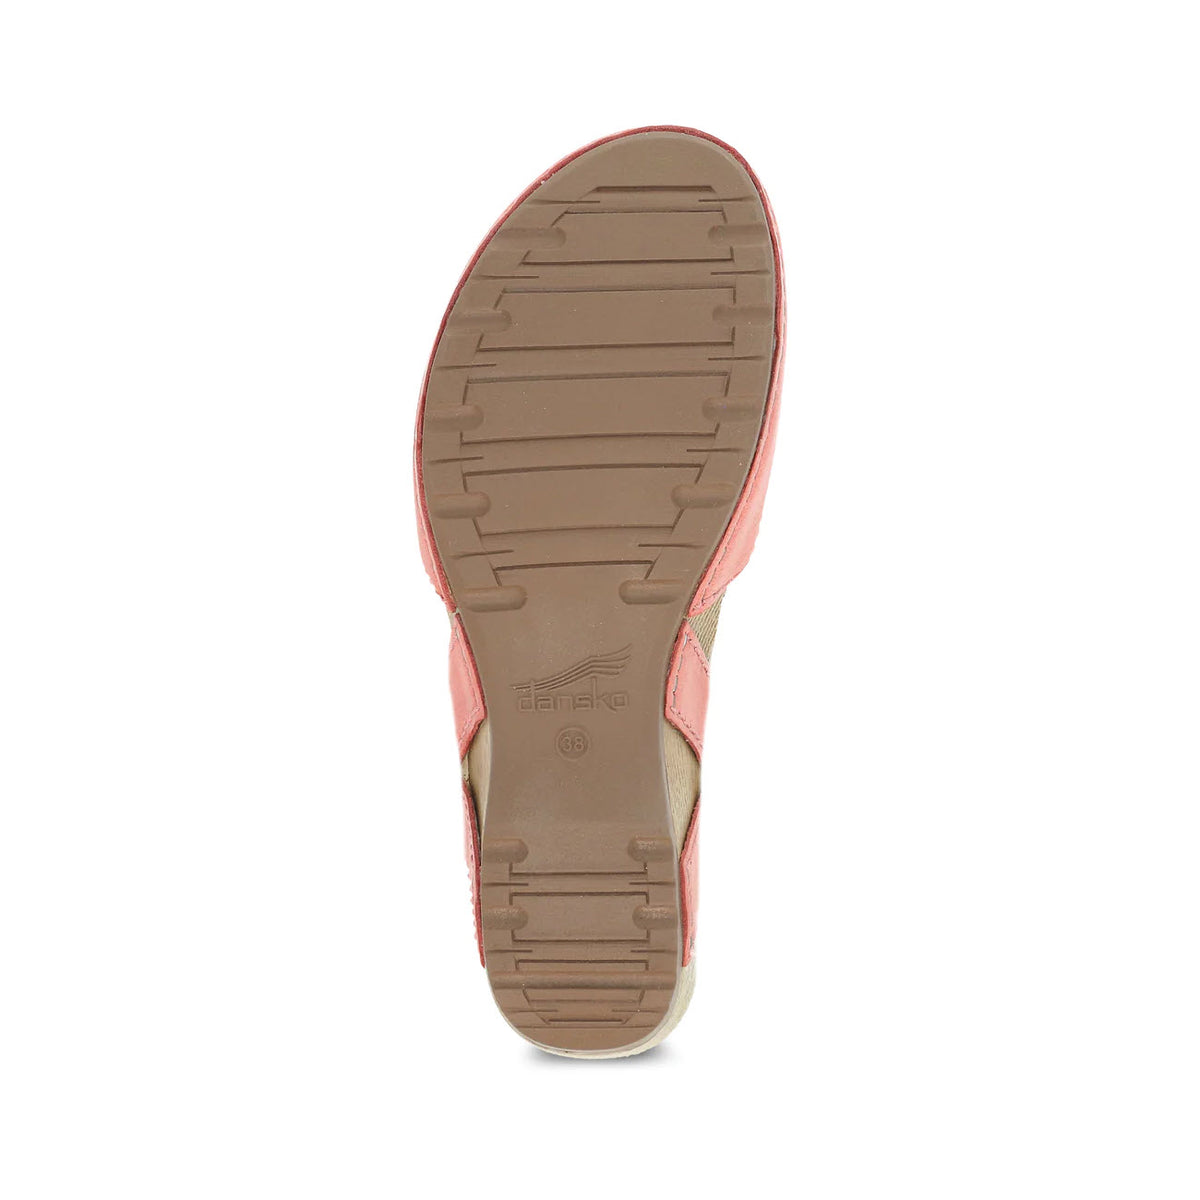 A single closed toe sandal sole facing upward, featuring a tan and brown color scheme with textured treads and visible Dansko branding.